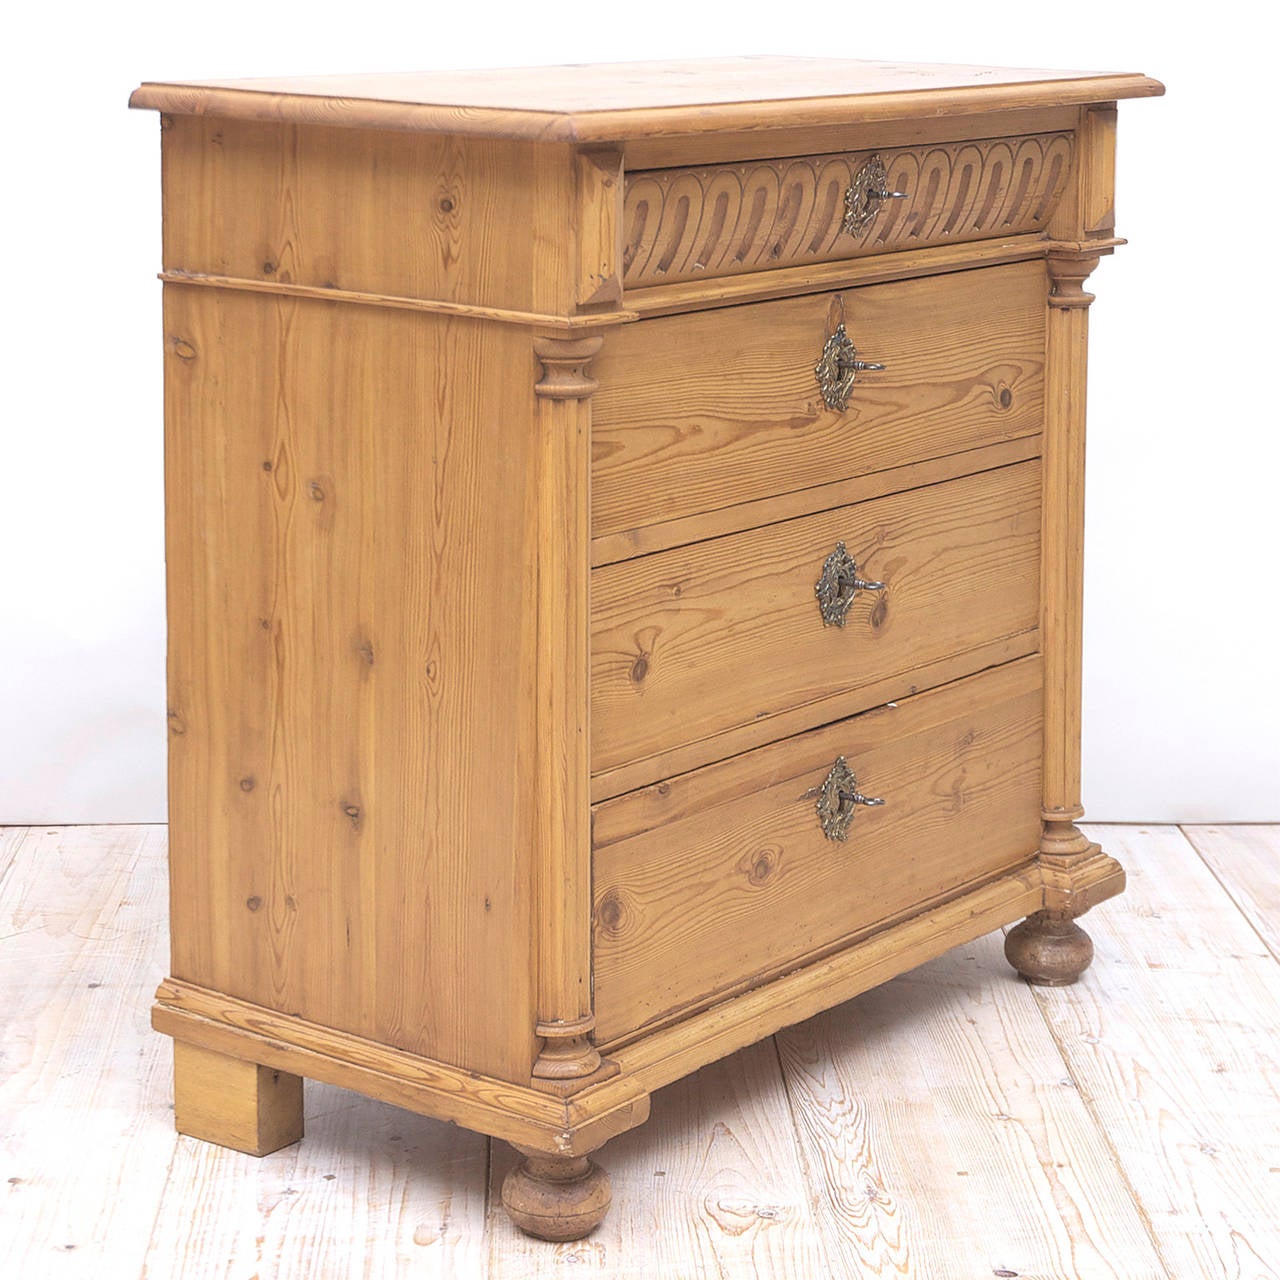 Neoclassical Revival 19th Century Swedish Chest of Drawers in Pine